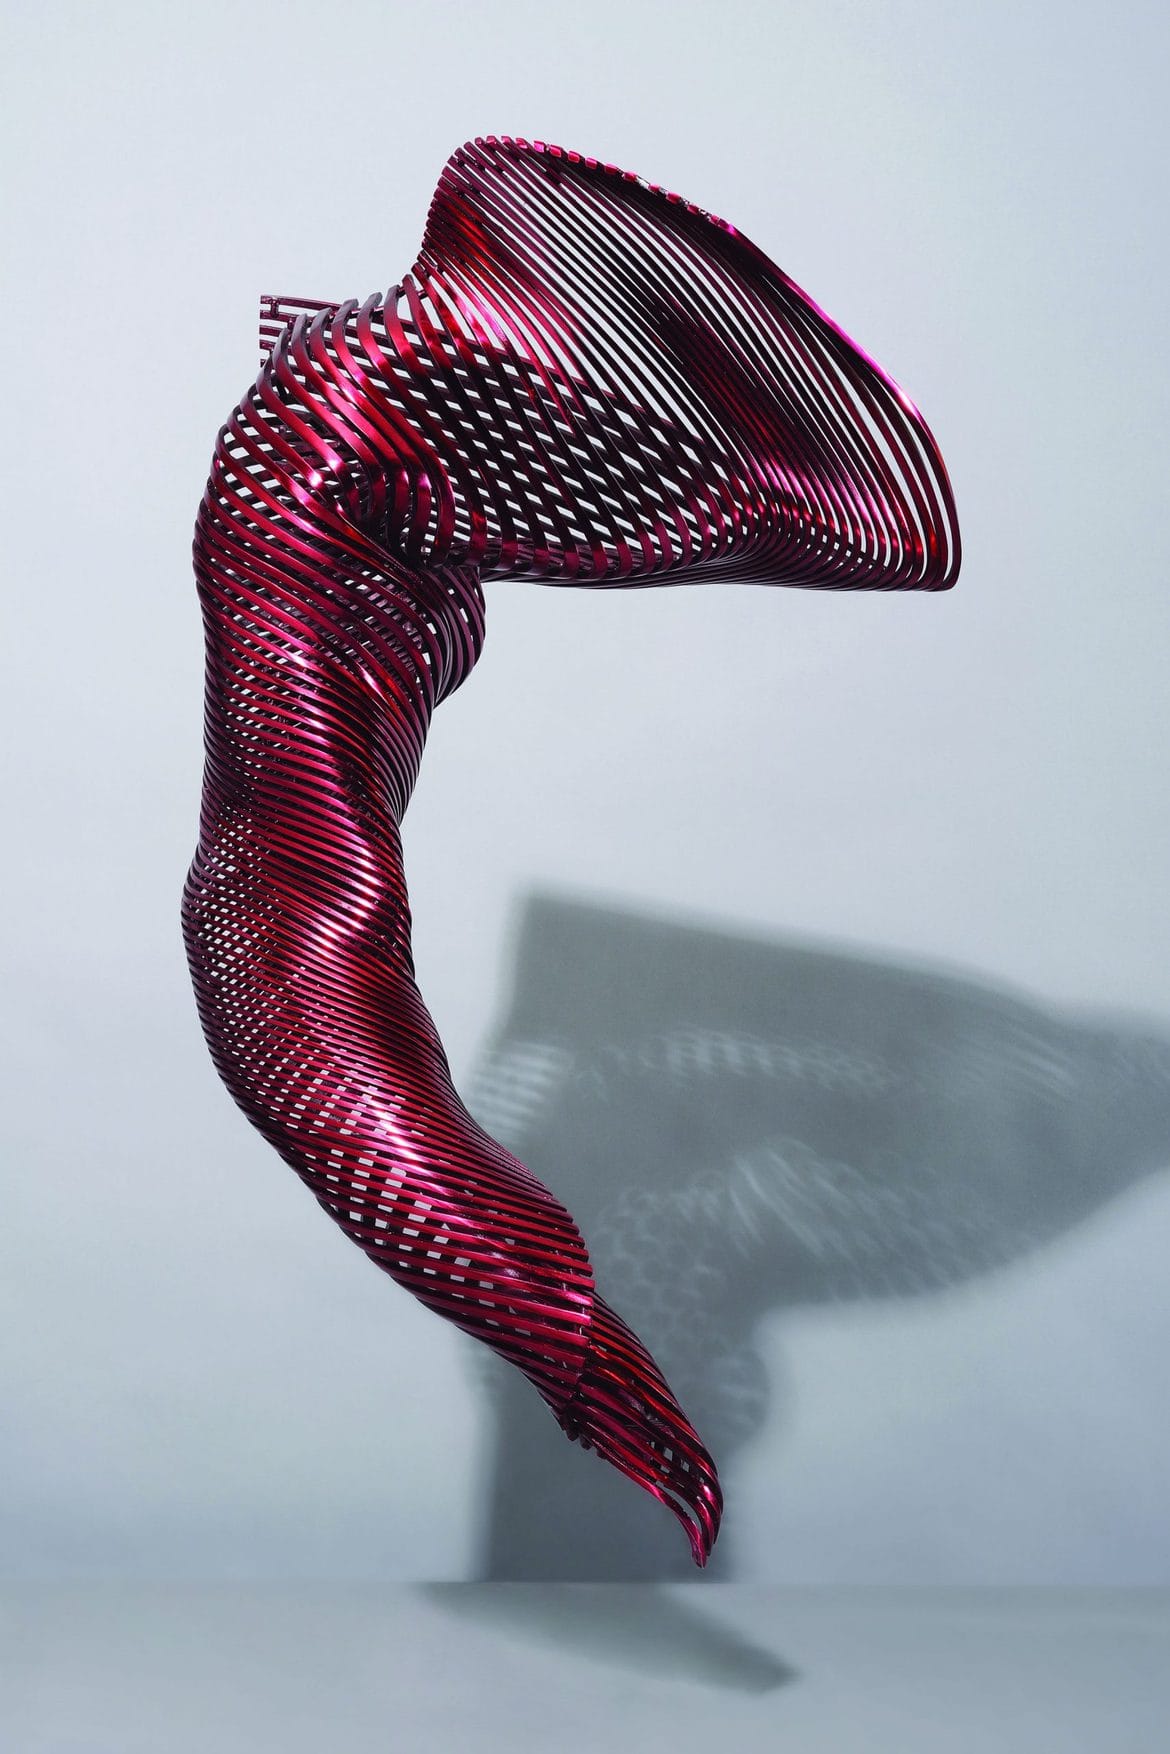 ‘I Am-Dancer’, 2015, stainless steel, red polychrome, 100 x 41 x 56 cm, artist’s proof, edition of 5 + 1AP